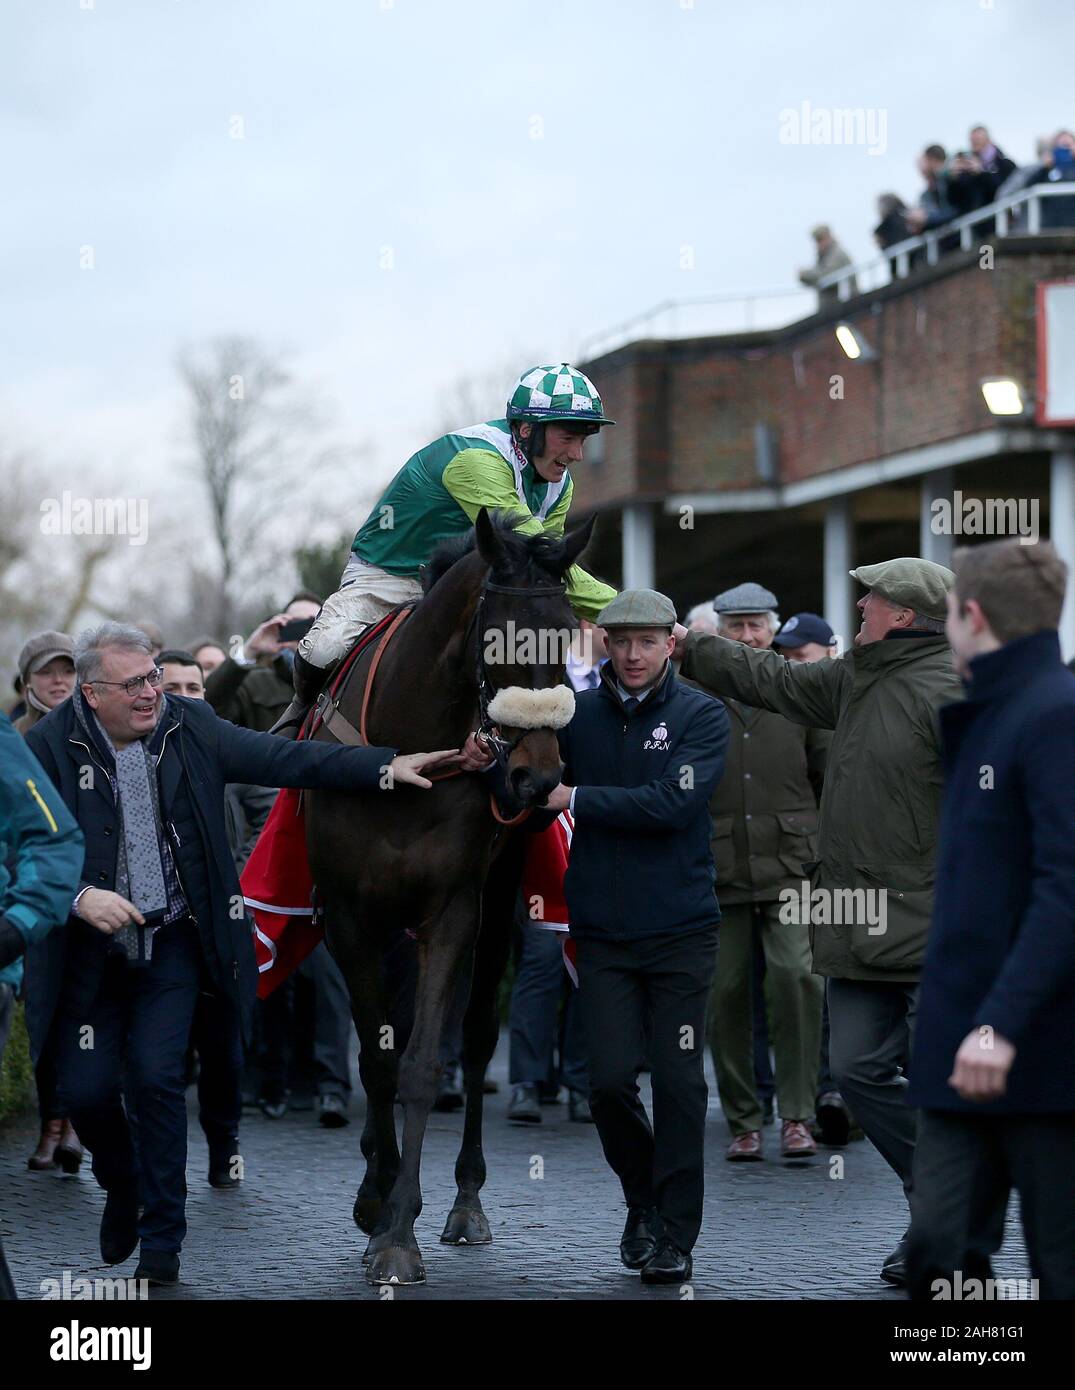 Clan Des Obeaux and jockey Sam Twiston-Davies with trainer Paul Nicholls after winning the Ladbrokes King George VI Chase during day one of the Winter Festival at Kempton Park Racecourse. Stock Photo